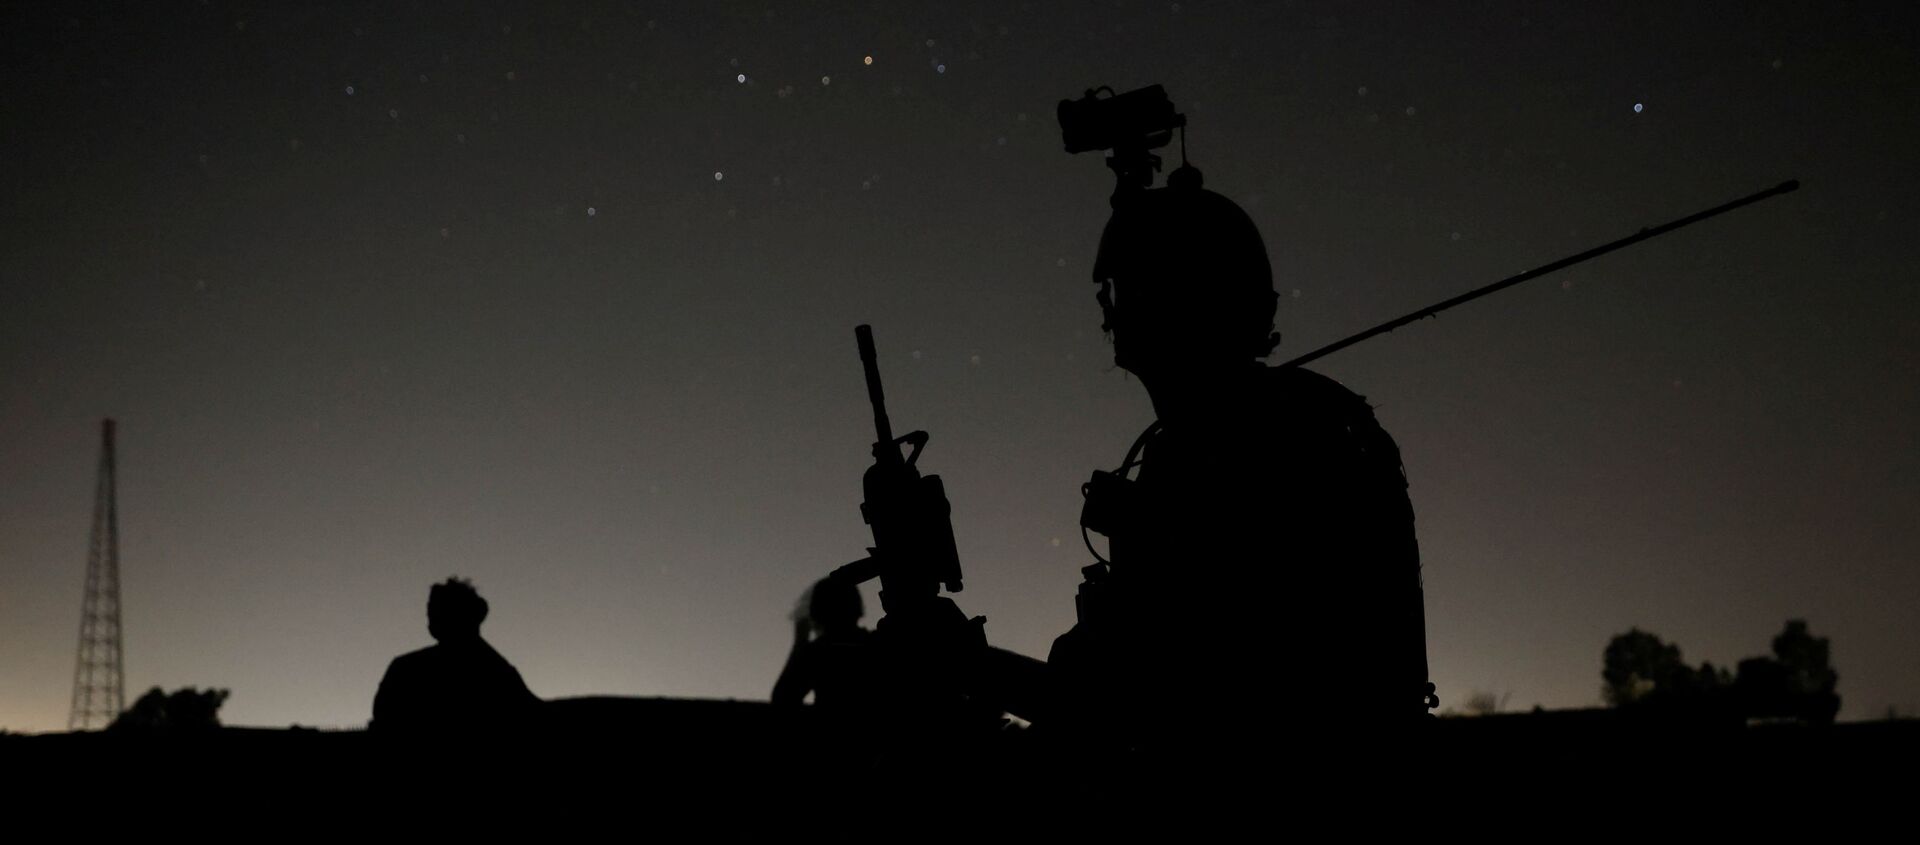 Members of the Afghan Special Forces keep a watch as others search houses in a village during a combat mission against Taliban, in Kandahar province, Afghanistan, July 12, 2021 - Sputnik International, 1920, 02.09.2021